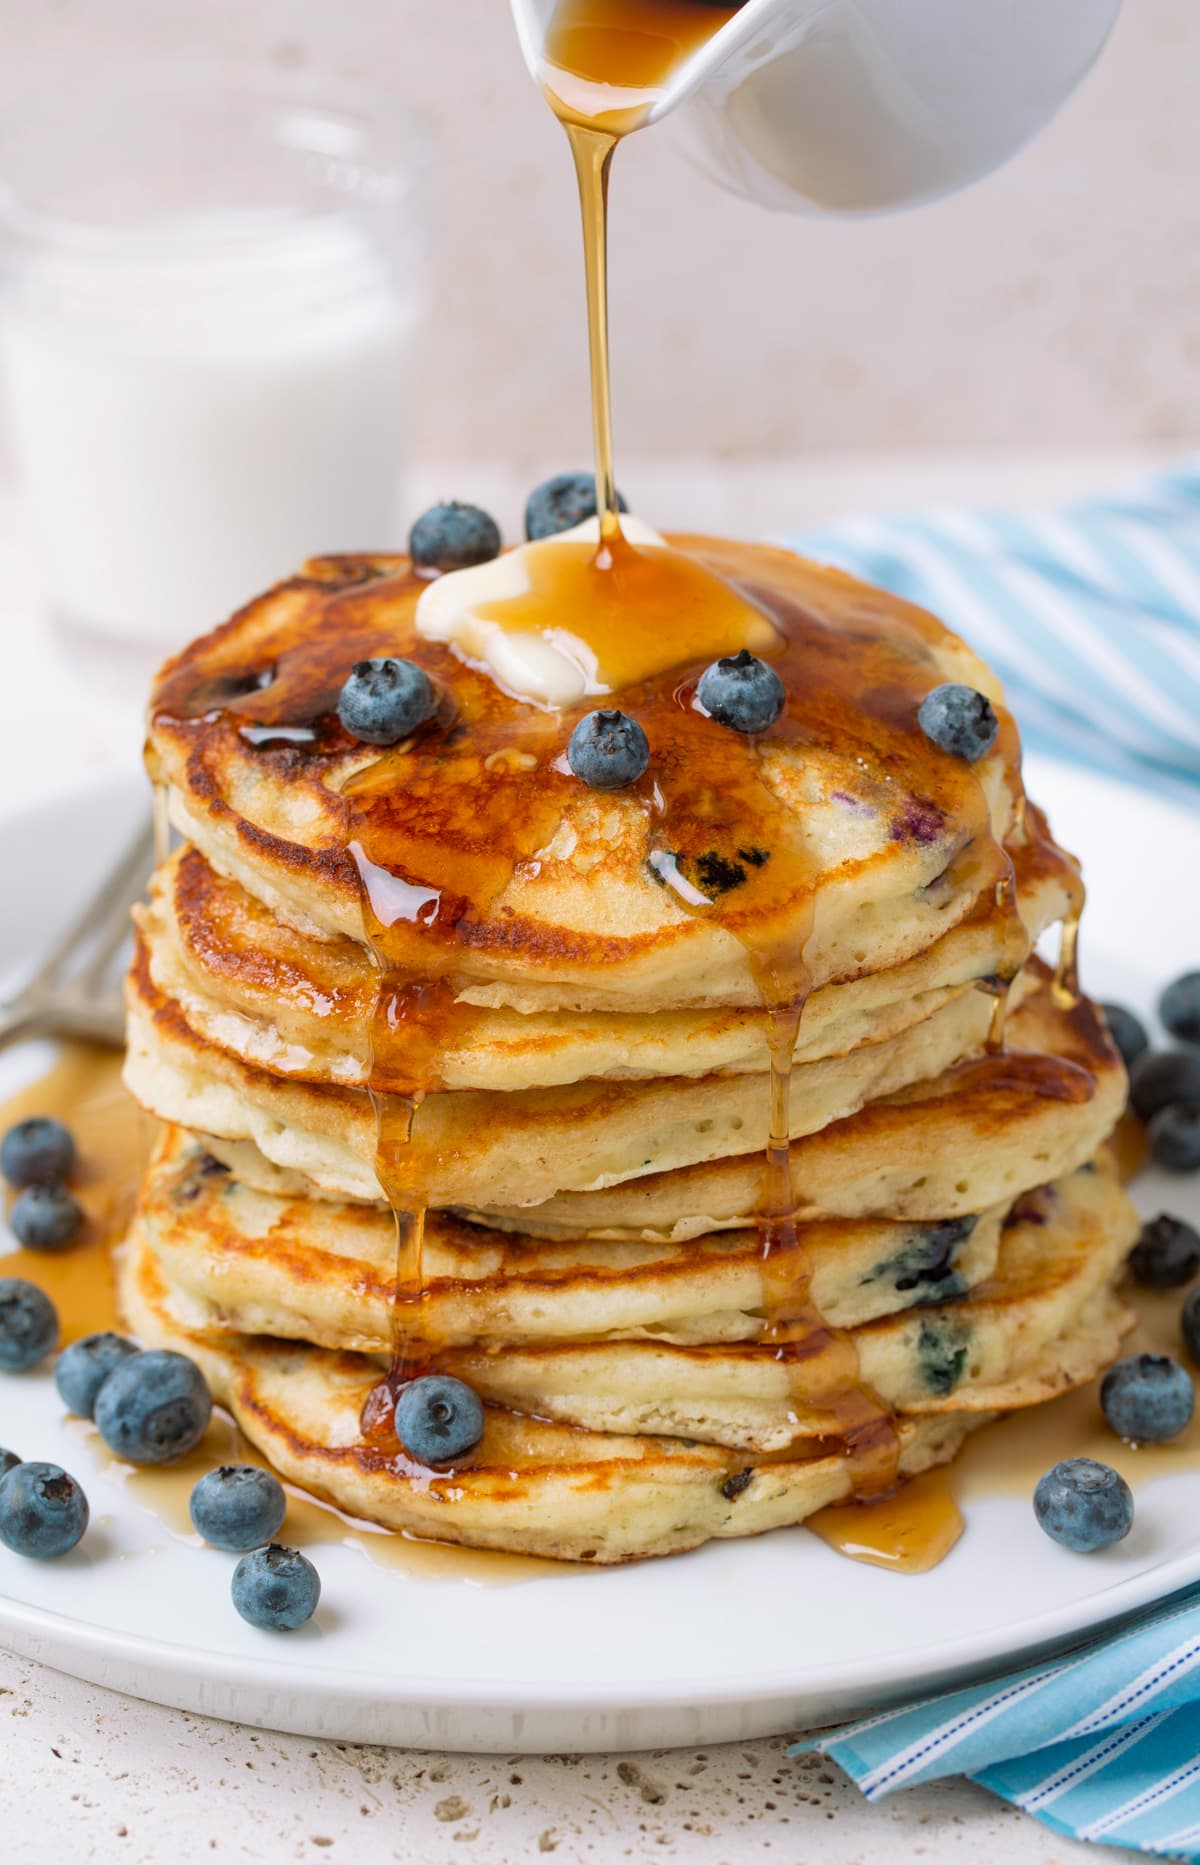 Pouring syrup over stack of homemade blueberry pancakes